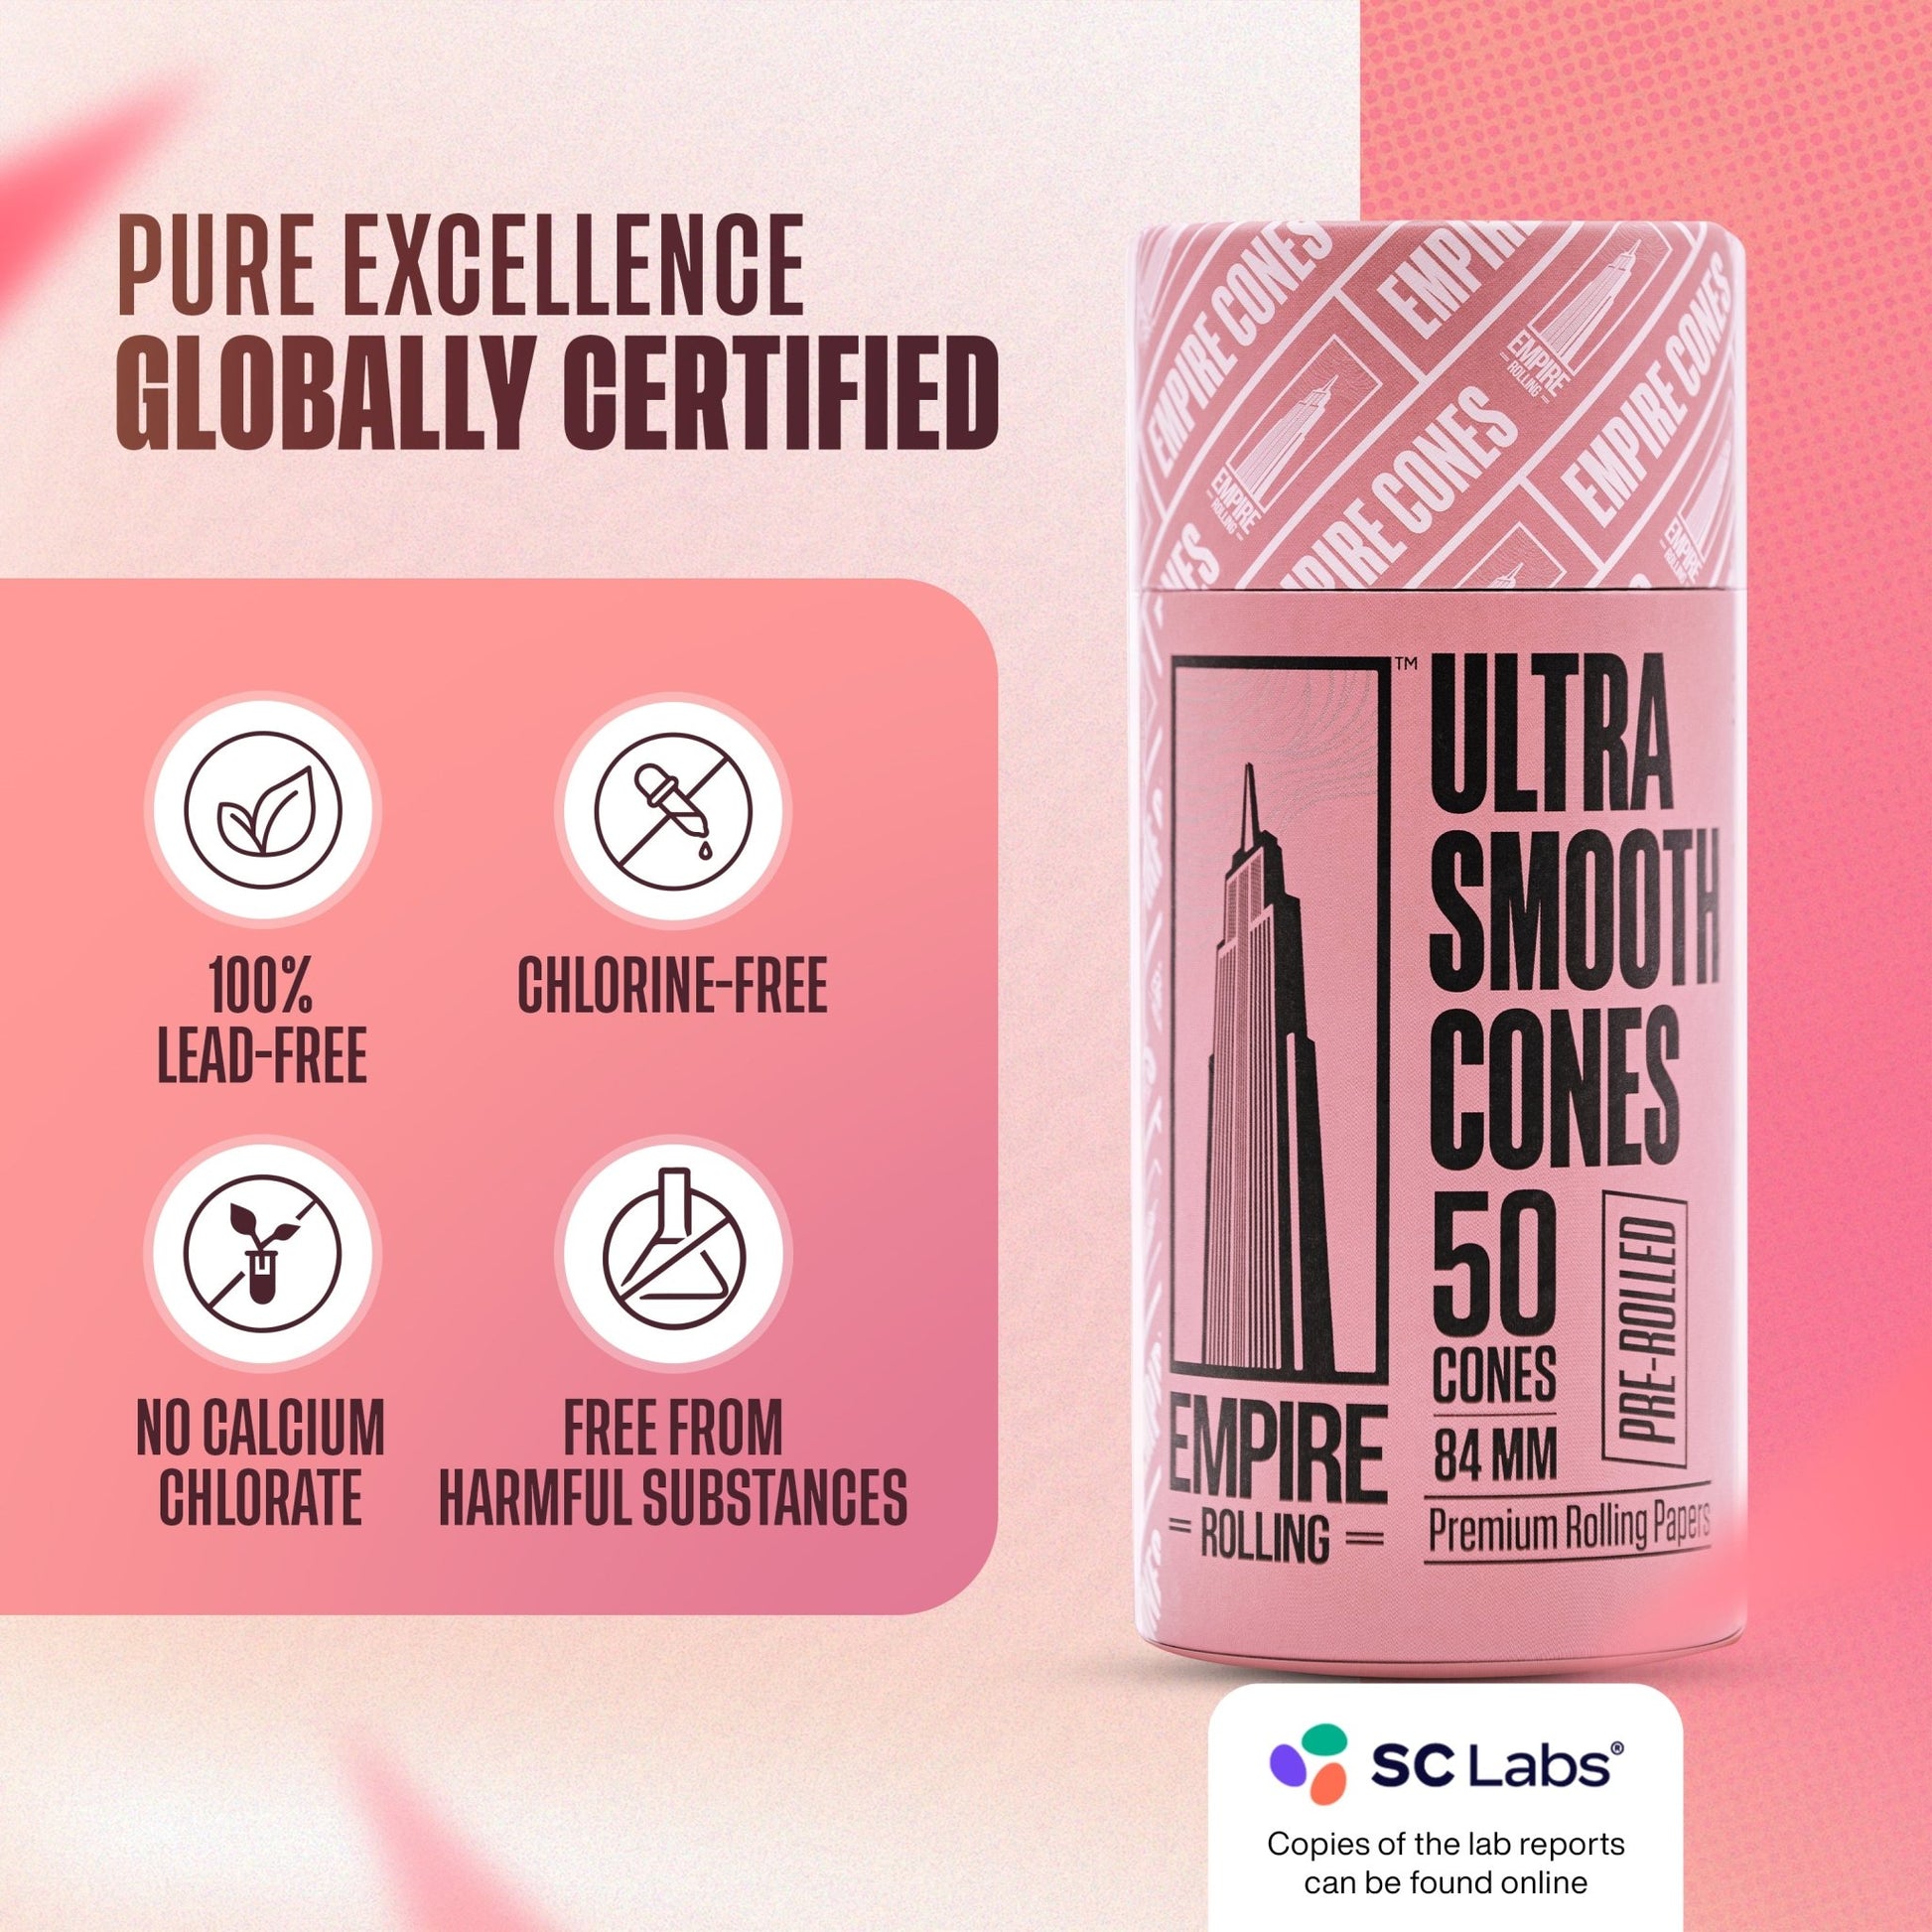 Empire Rolling's King Size Organic Hemp Rolling Papers, eco-friendly and crafted with high-quality, natural materials for a premium smoking experience.Ultra Smooth Pink Cones 50 Count - Empire Rolling Papers